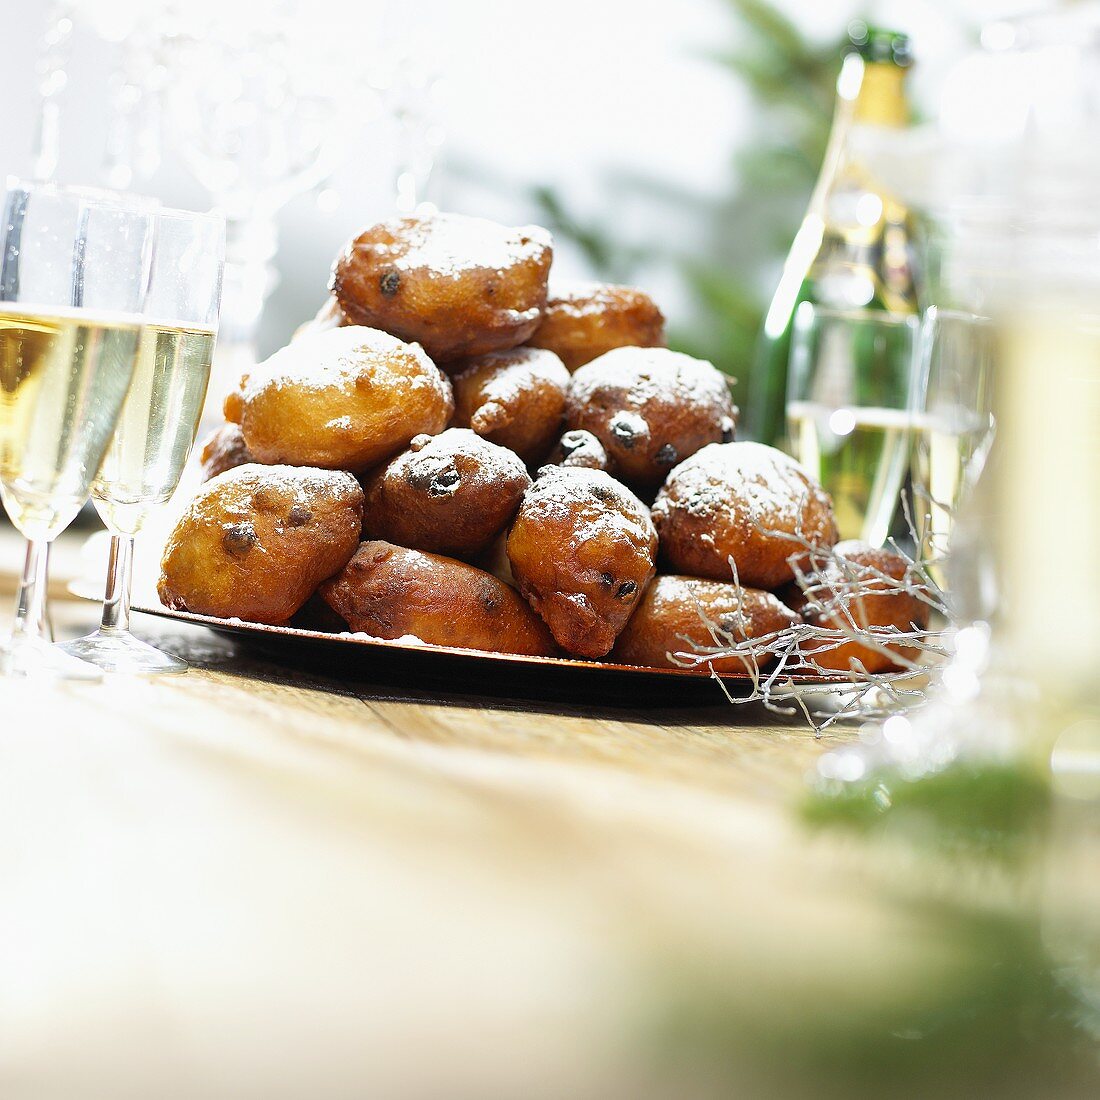 Oliebollen (deep fried New Year's pastries, Netherlands)